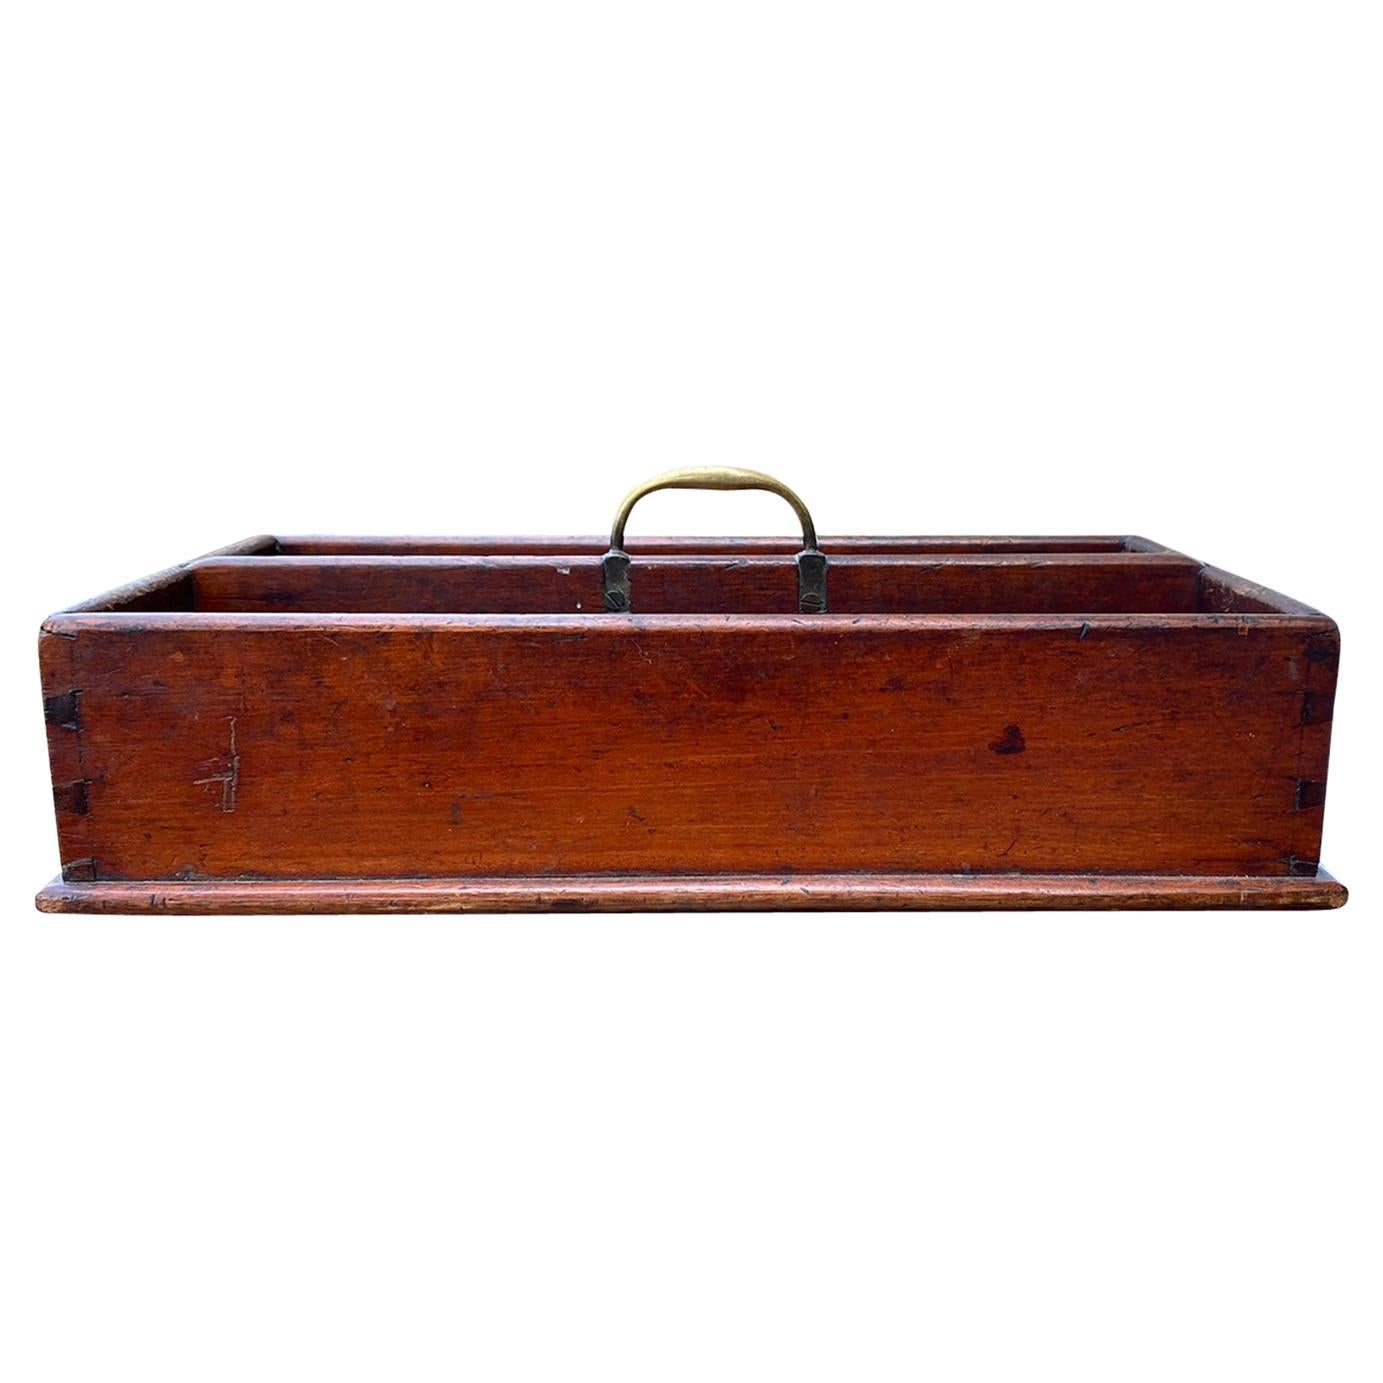 19th Century Wood Cutlery Tray / Box with Brass Handle